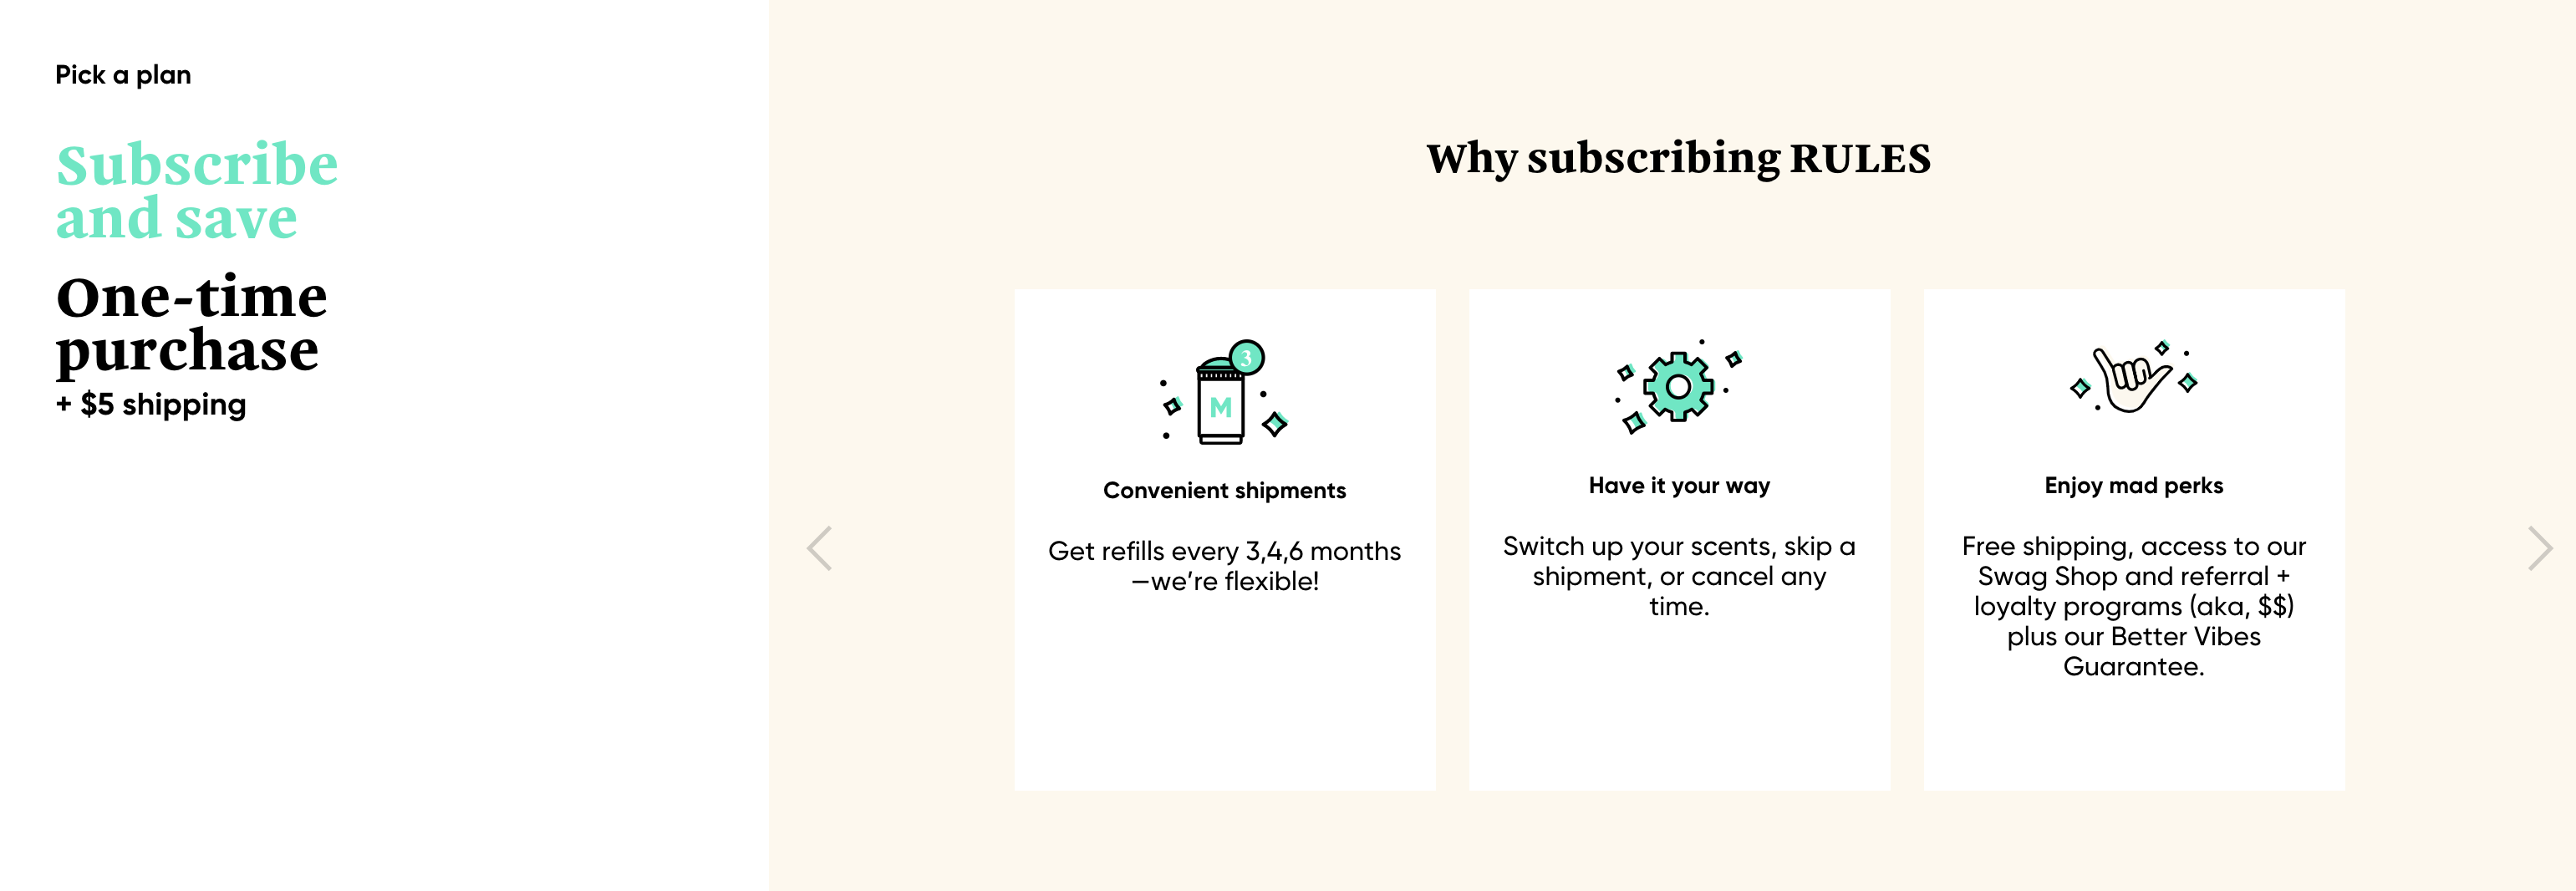 Step 3 in Myro’s sign up flow is the choice to subscribe or make a one-time purchase.